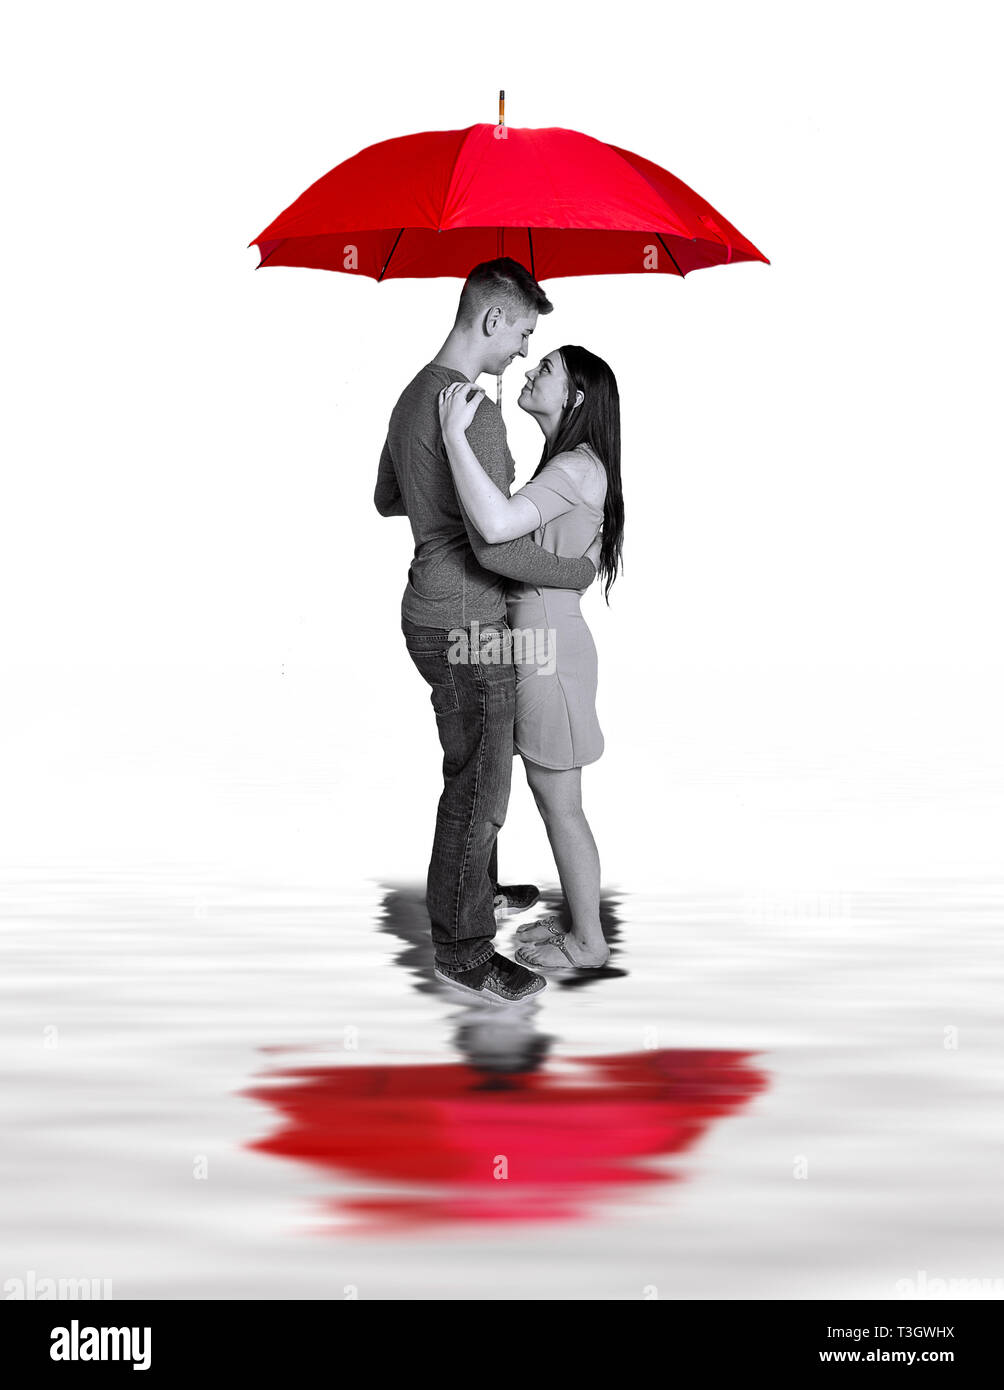 Newly Engaged Couple embracing under large red umbrella with reflections of them in water below.  Concept Image Stock Photo